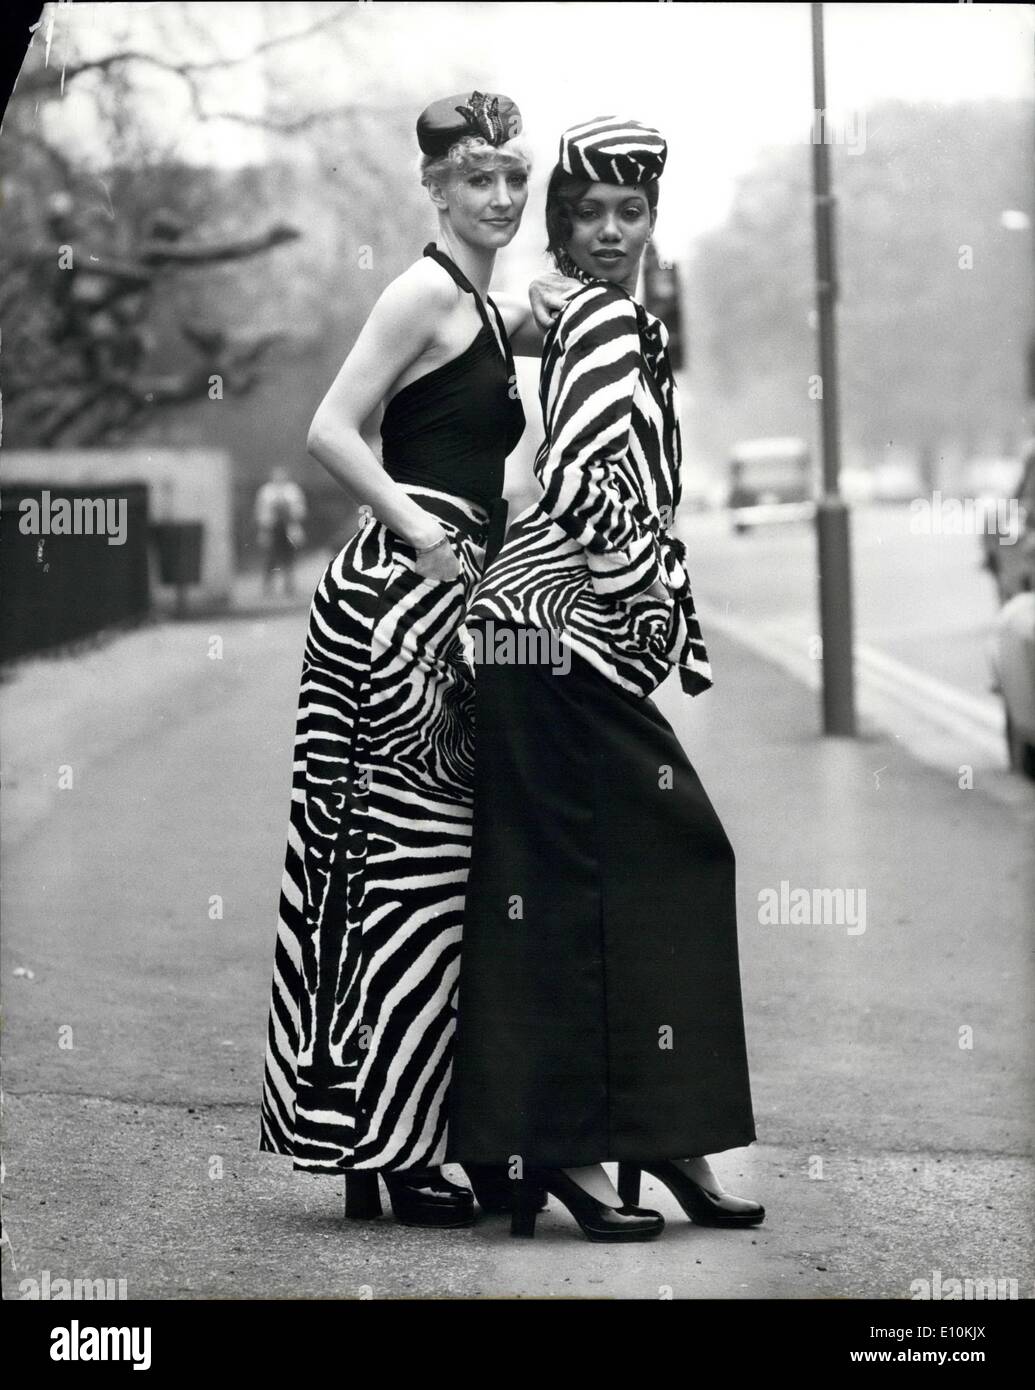 Apr. 04, 1973 - Tsaritsar Autumn/Winter fashion collection shown at the Hyde Park Hotel. Photo shows Model Vicki Hodge wears a black silk jersey halter top over a Zebra printed long skirt (left) and model Hazel wearsa zebra print wrap jacket over a black crape long skirt, two of the collection shown today. Stock Photo